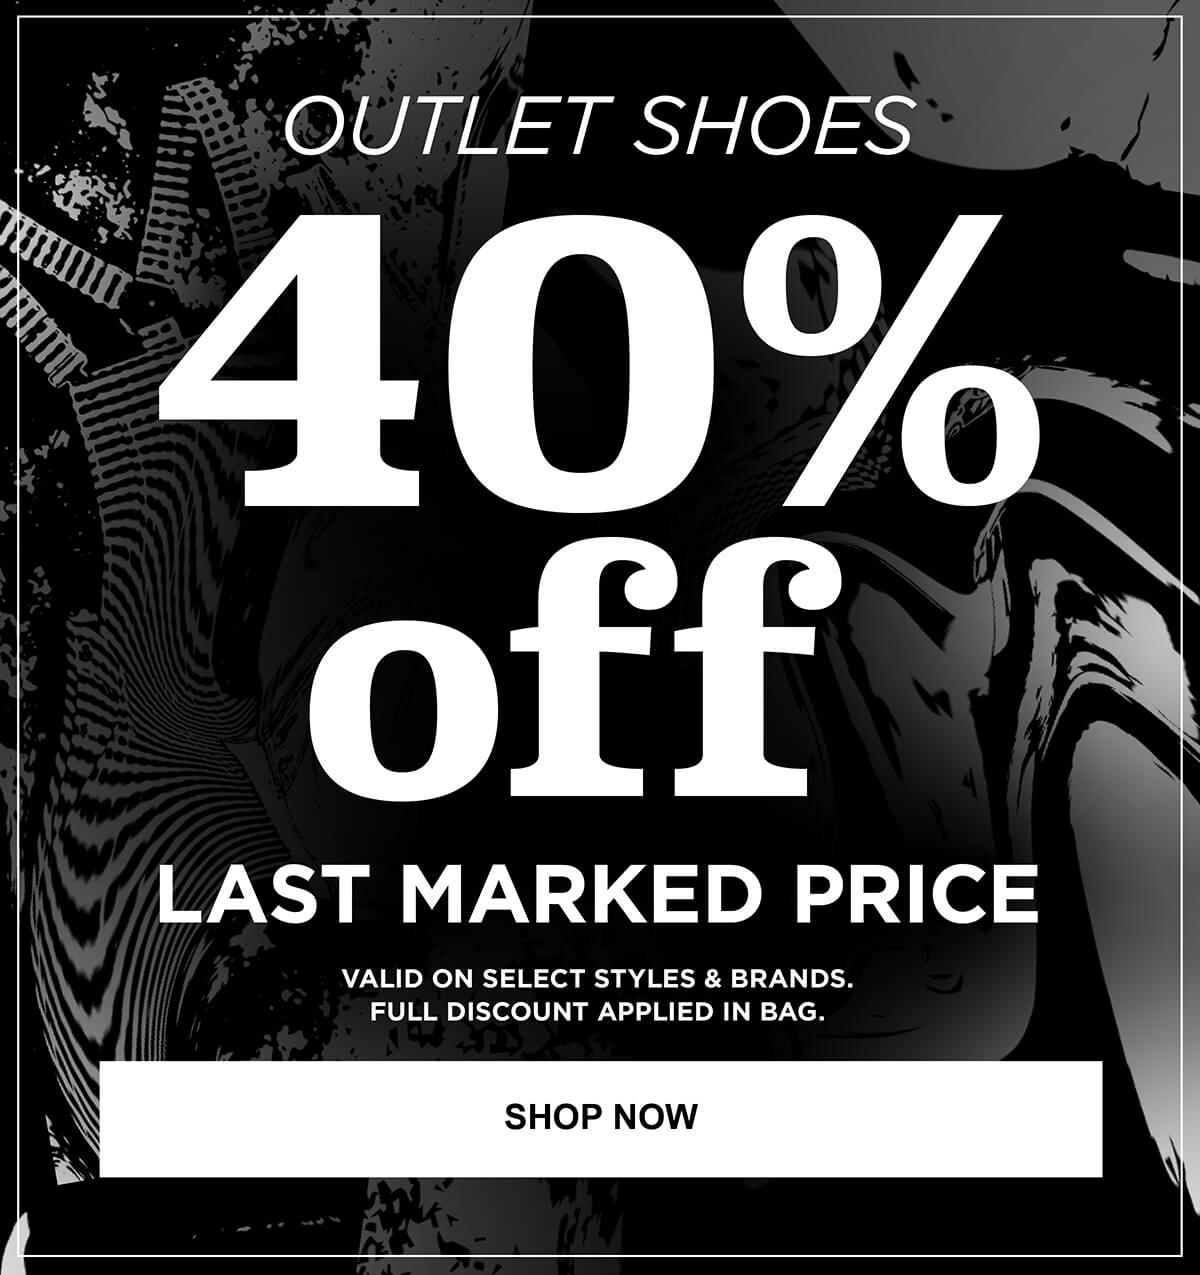 OUTLET SHOE SALE UP TO 40% OFF LAST MARKED PRICE